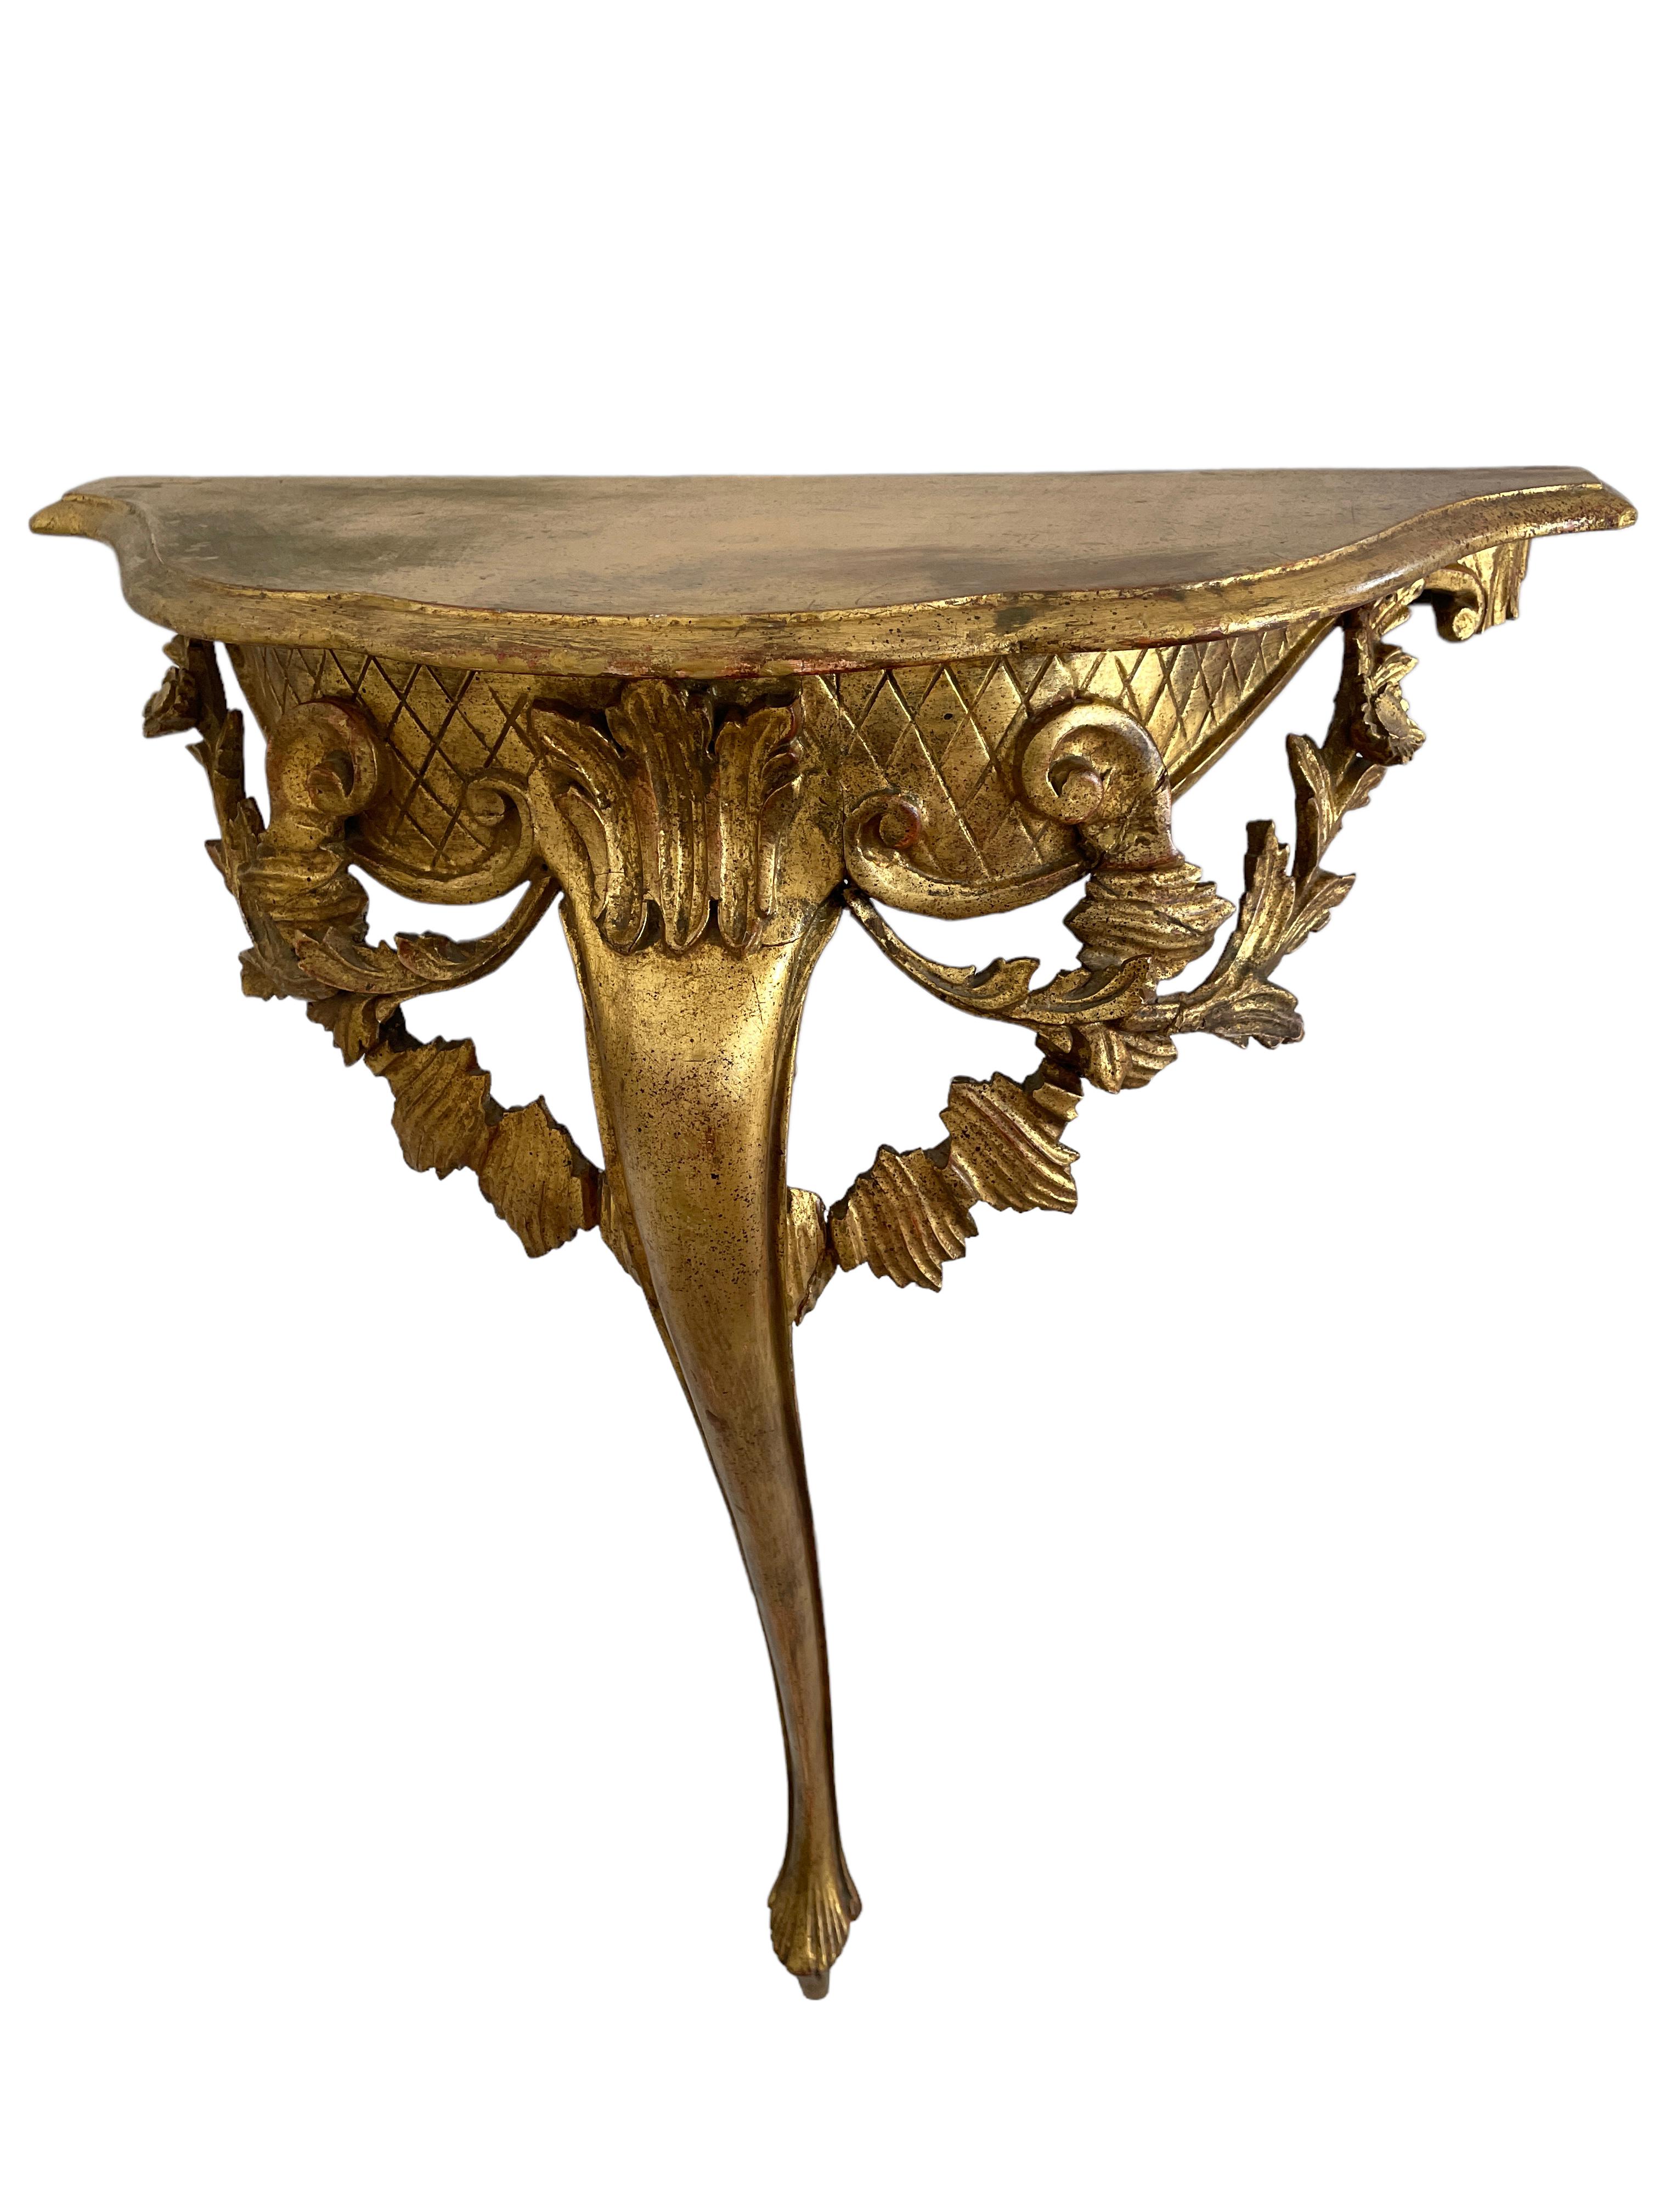 Vintage Hollywood Regency Tole Toleware Wall Console Table, Gilded Carved Wood 8